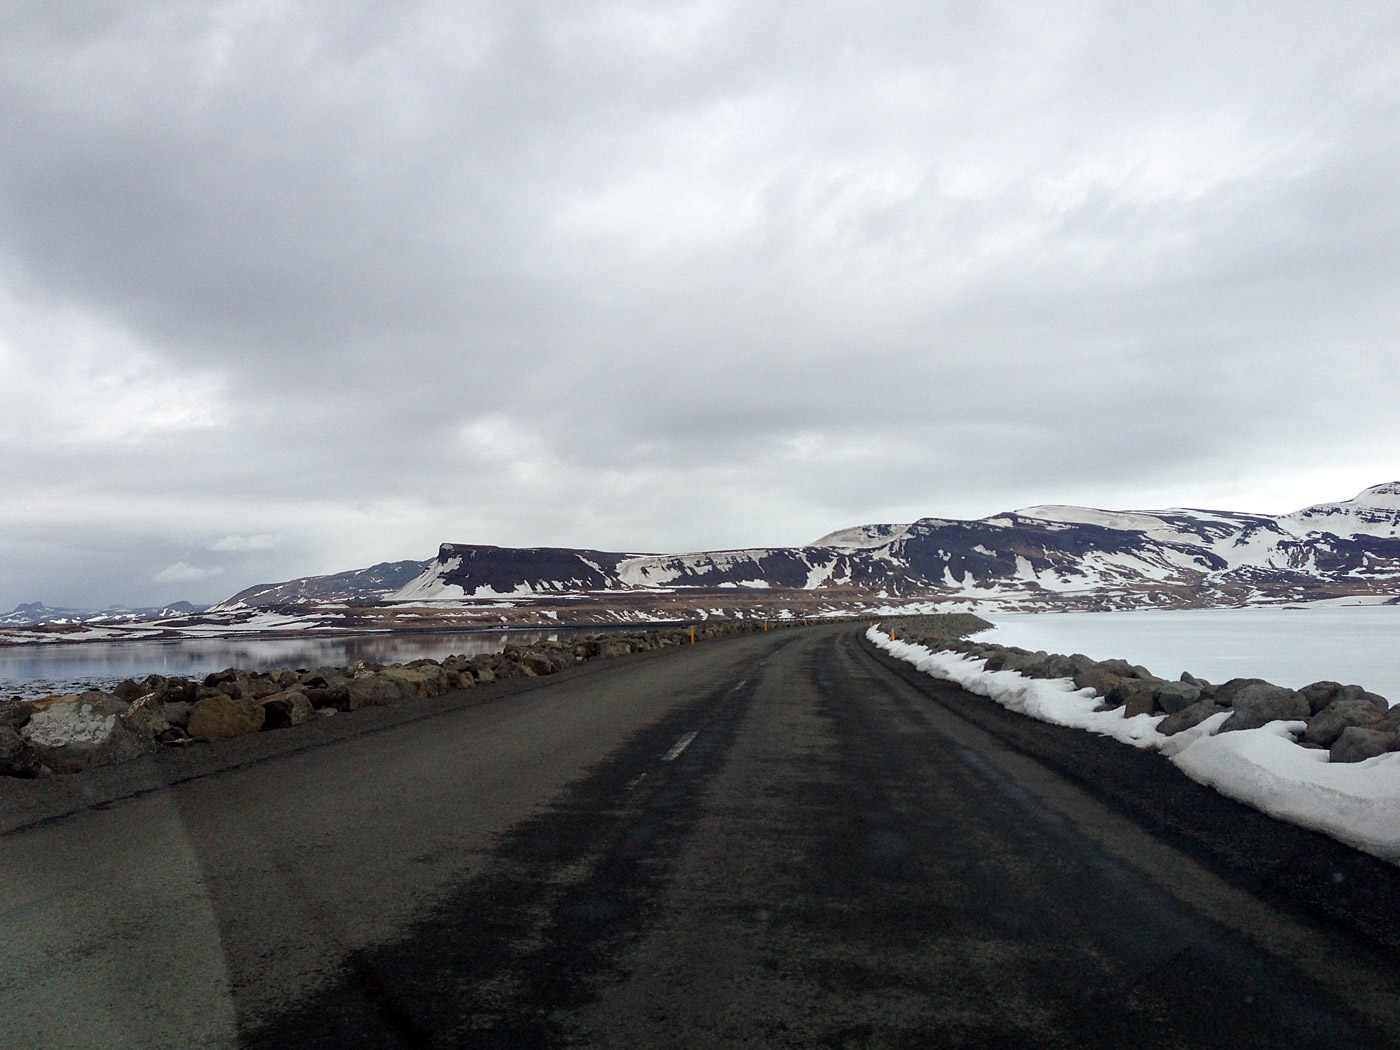 Djúpavík. Around Easter in Djúpavík. Friday. - Road 60, crossing the Gilsfjörður fjord - the sea side (left) is free of ice but the right side is covered with ice and snow. (29 March 2013)